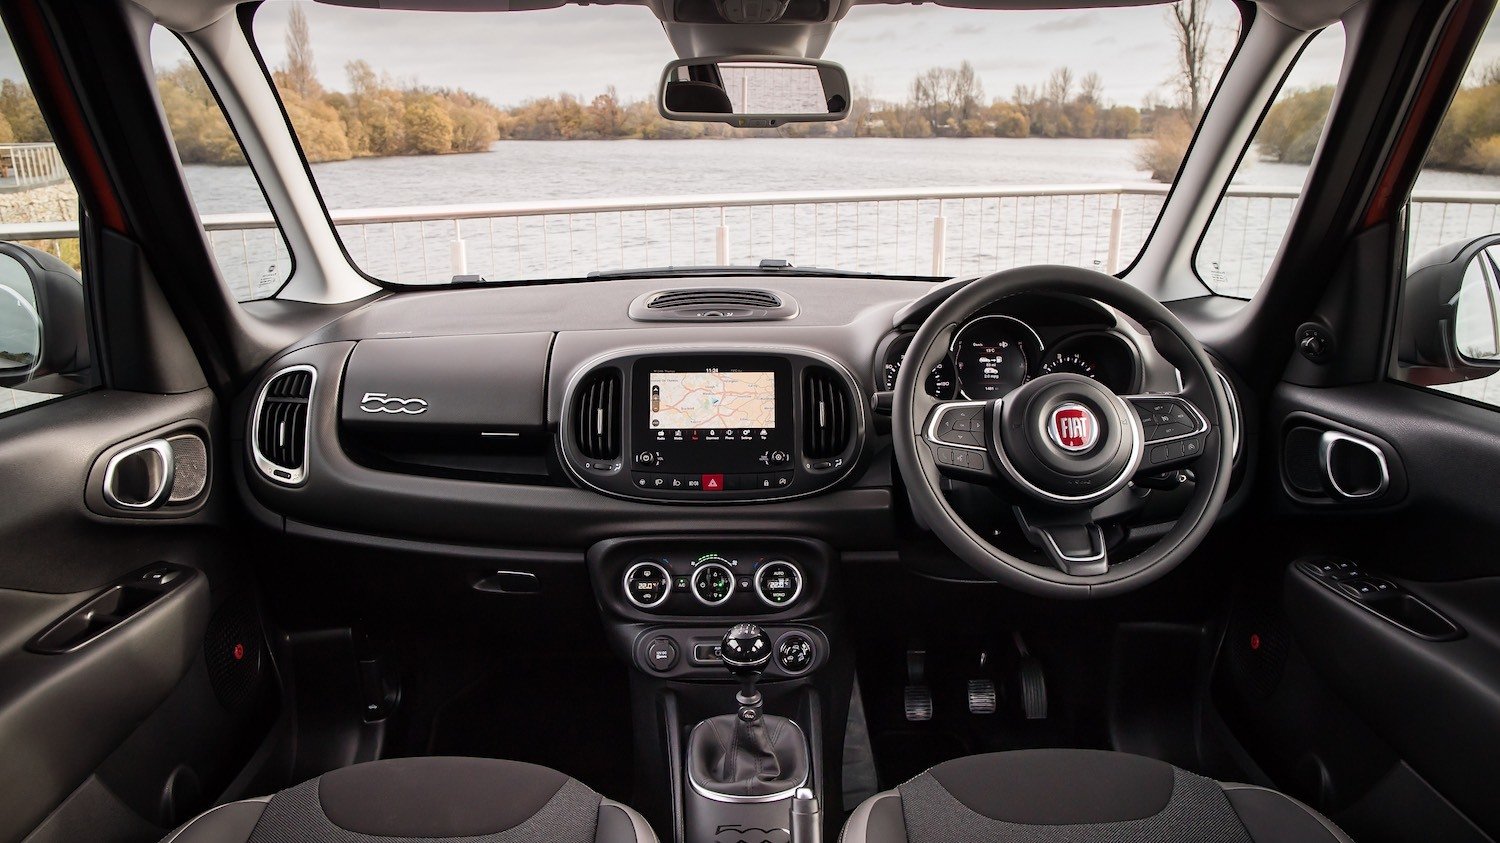 The Fiat 500L reviewed by Tom Scanlan for Drive 16